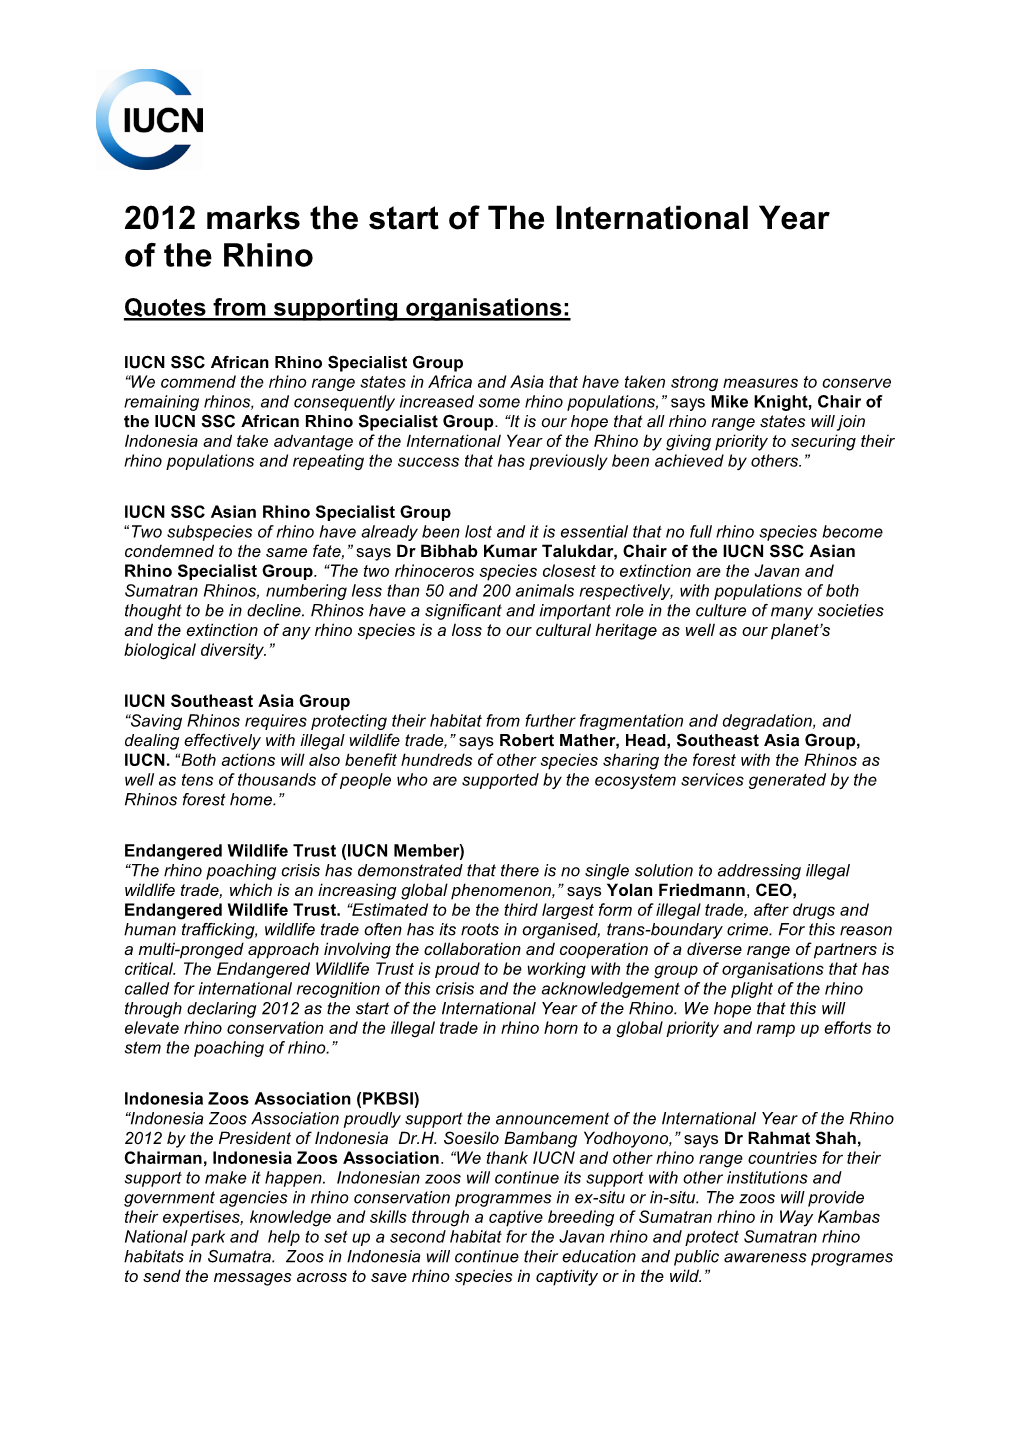 Quotes from Supporting Organizations for International Year of the Rhino